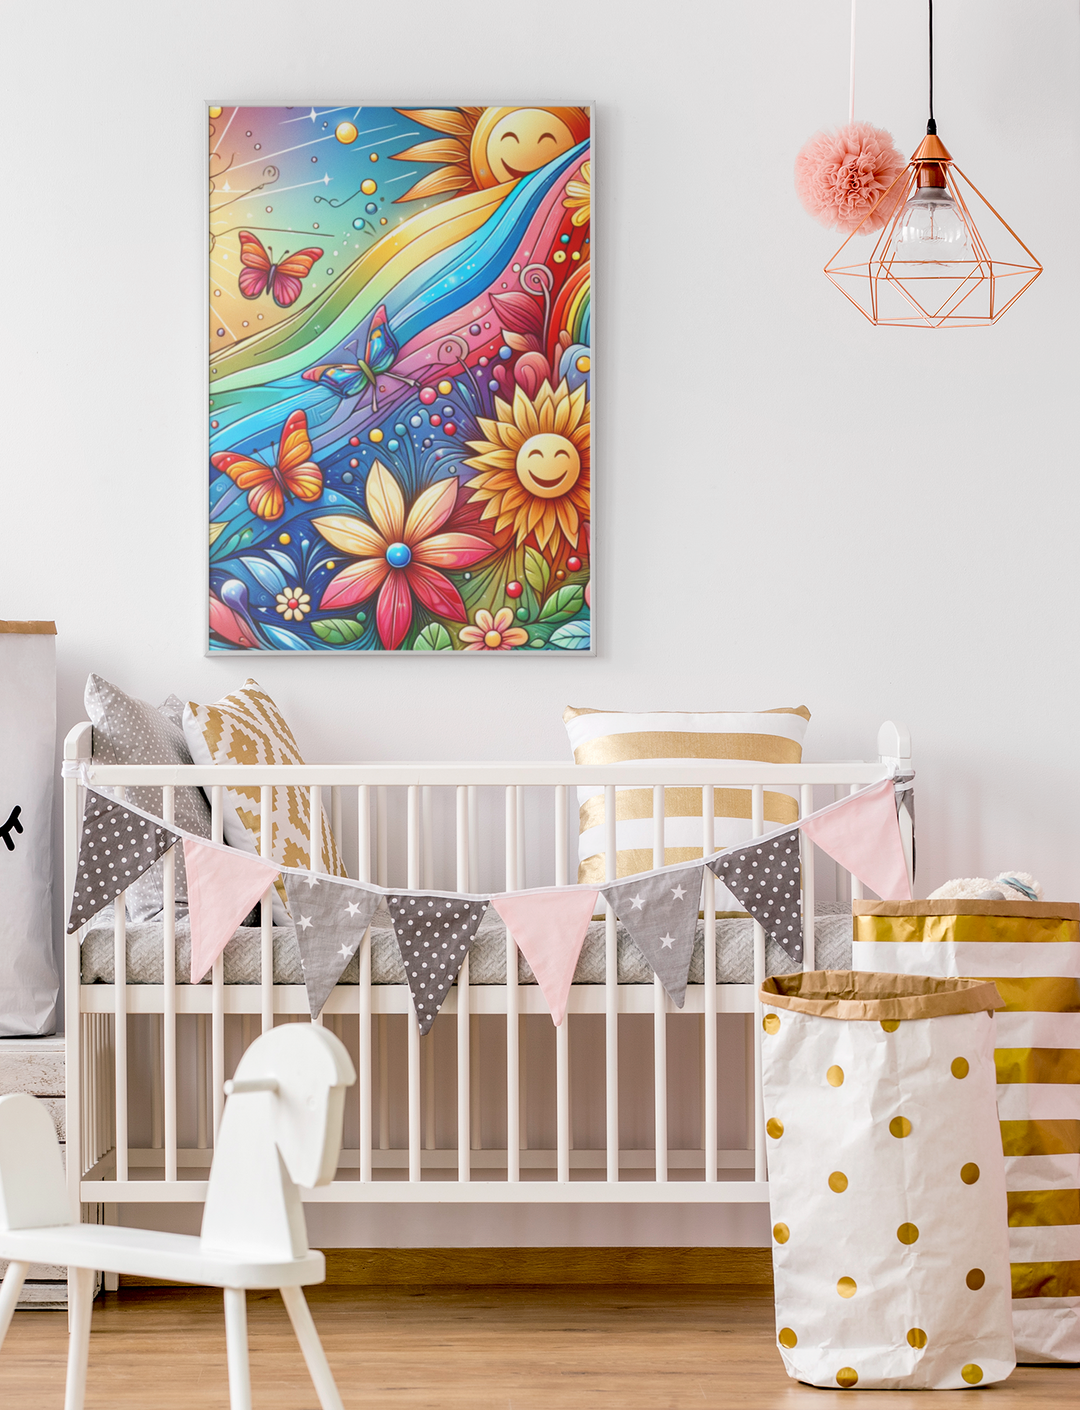 Bring Good Vibes into Your Nursery with Three Diamonds Designs' Positivity-Charged Love Canvas Print